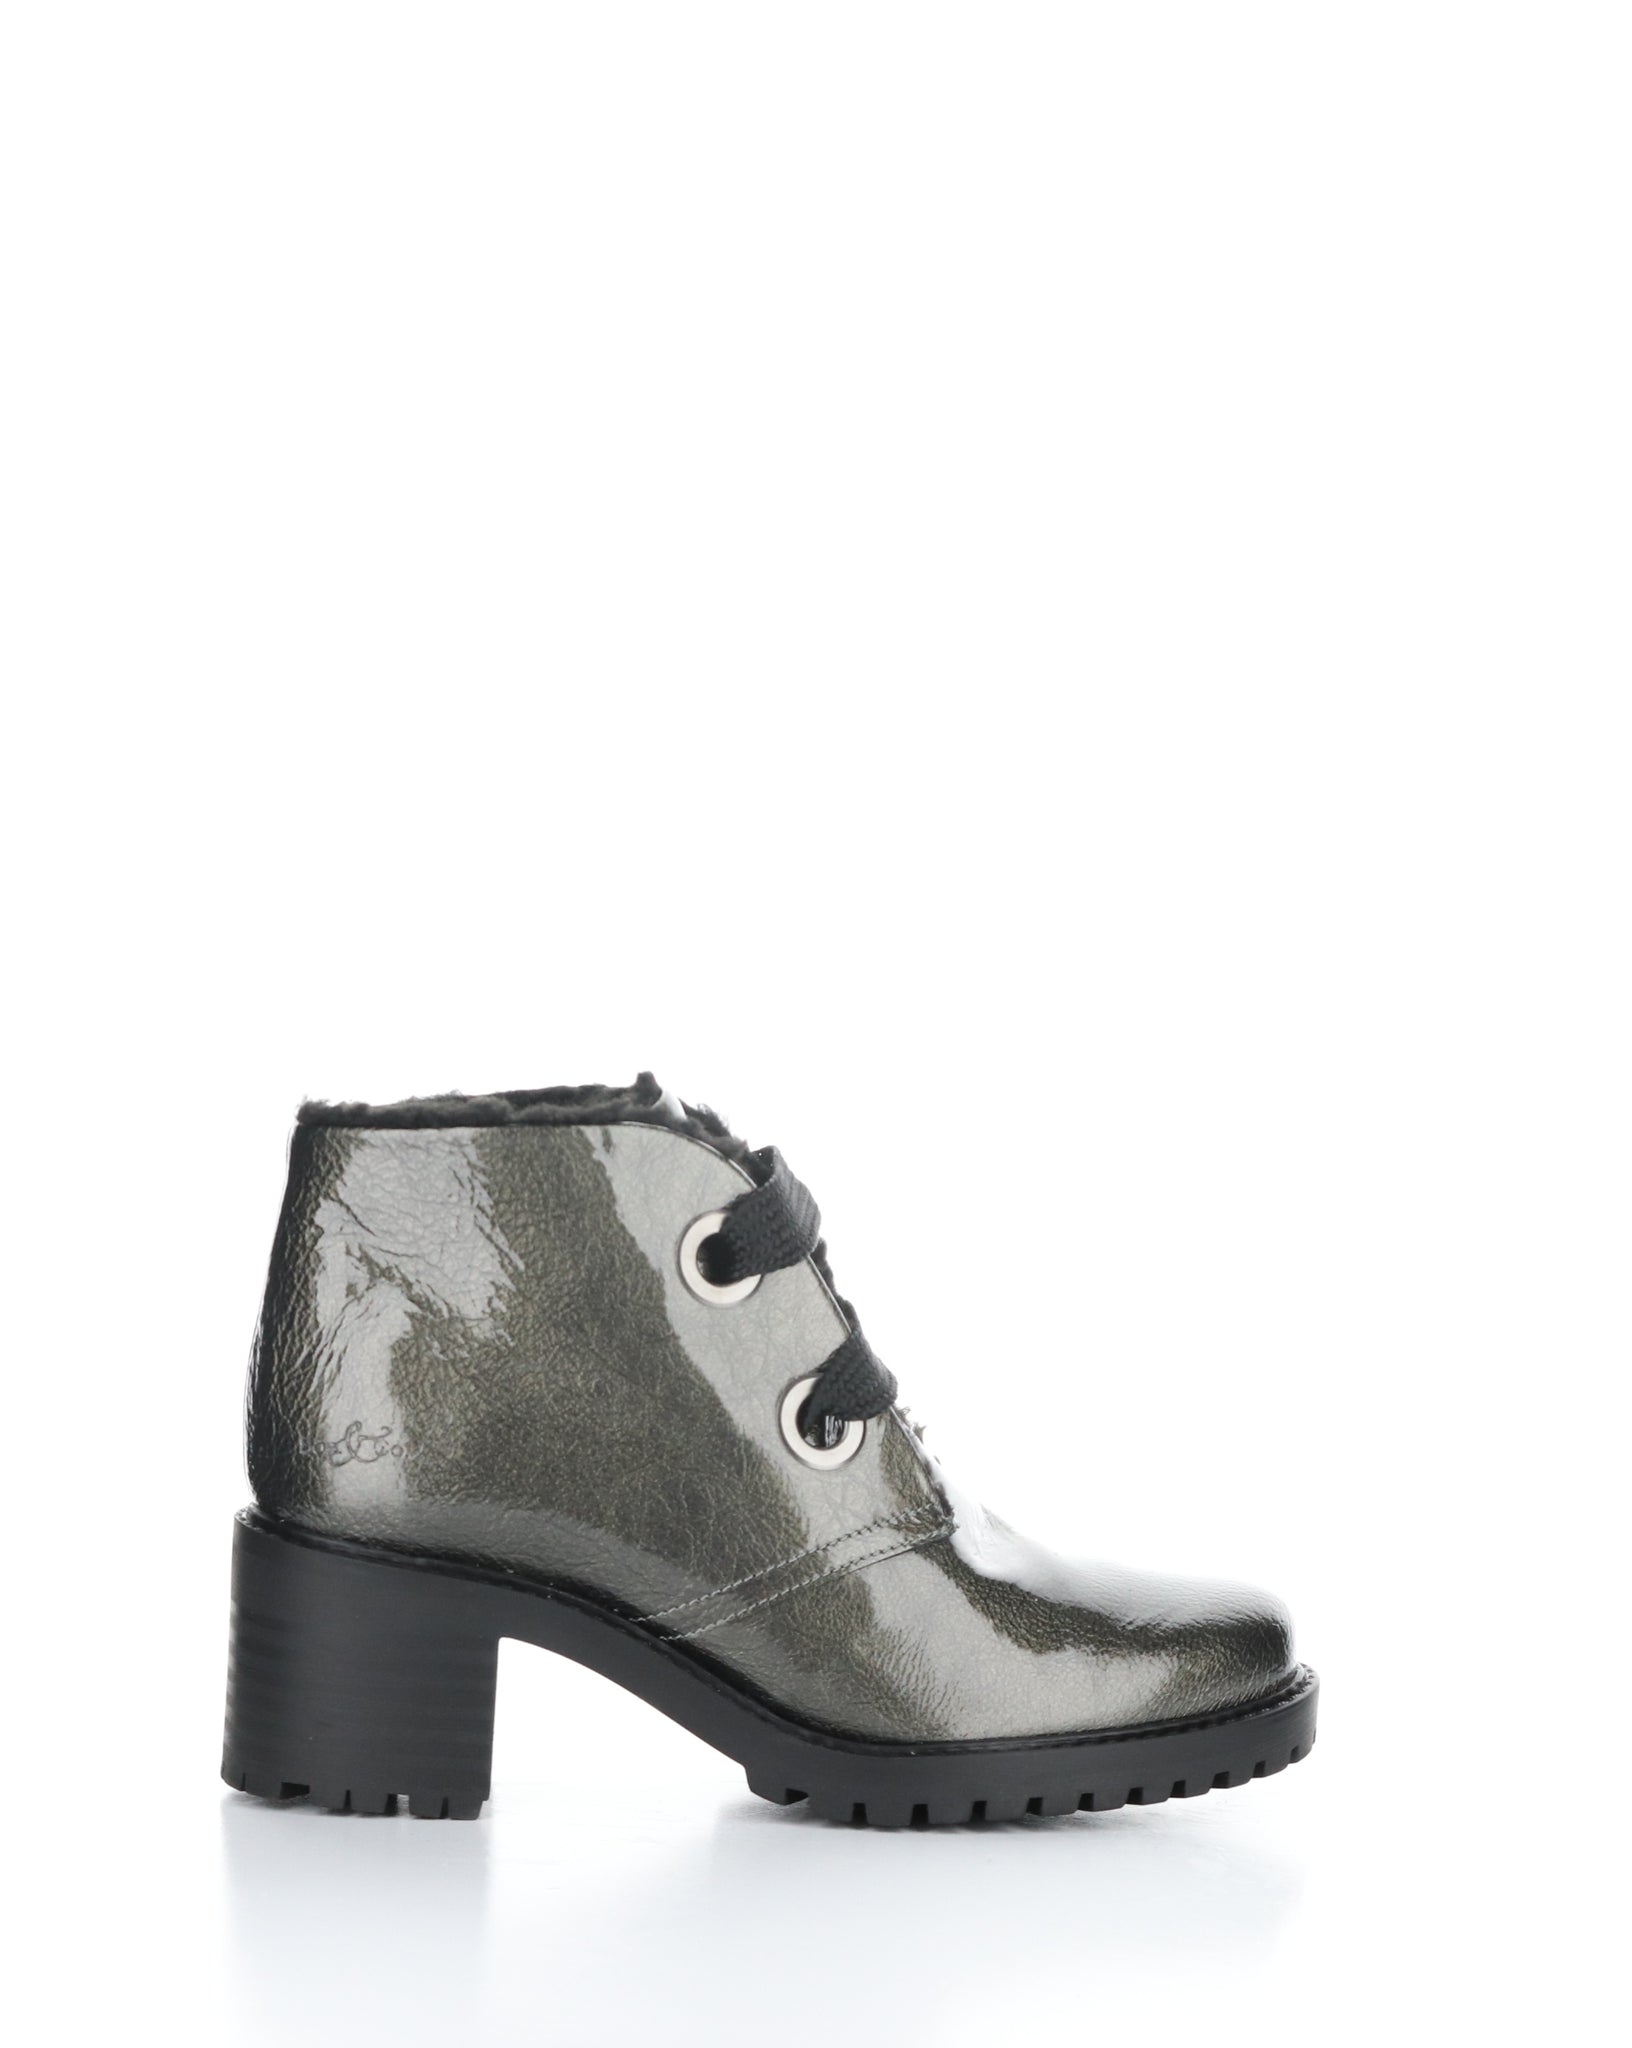 Bos&Co. "Index" Pewter - Waterproof Ankle Boot